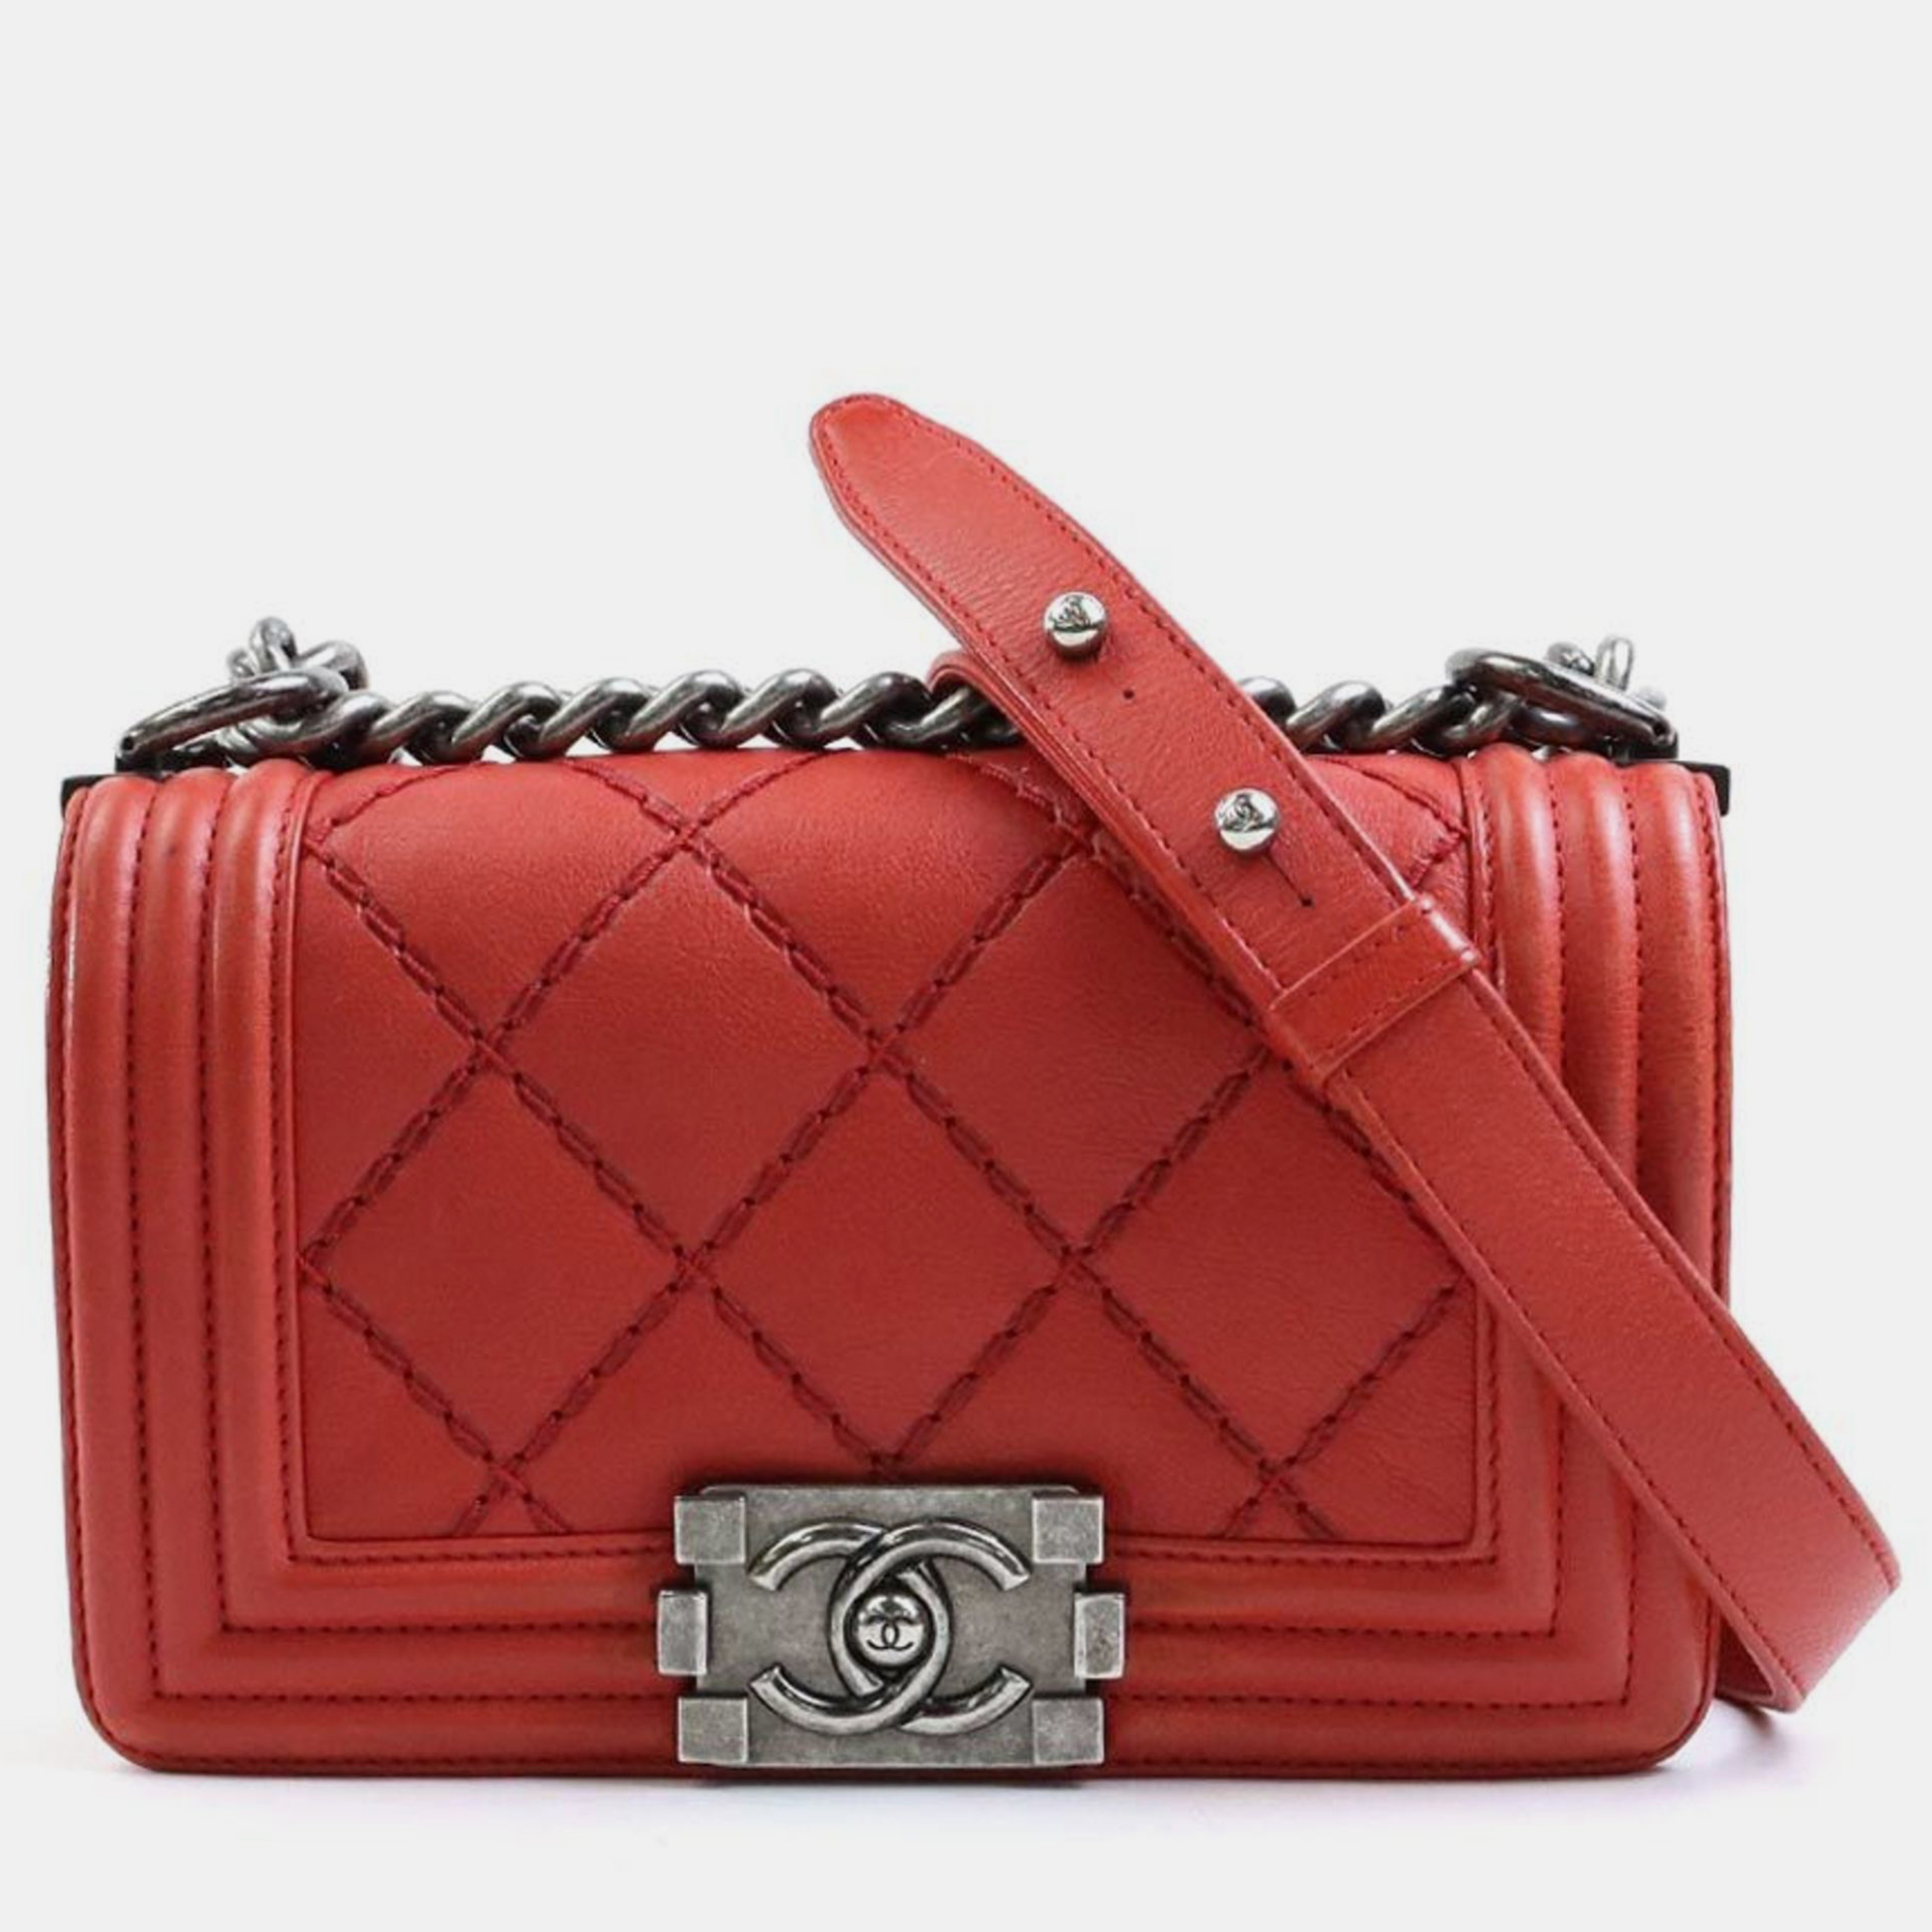 Chanel red leather mini boy bag